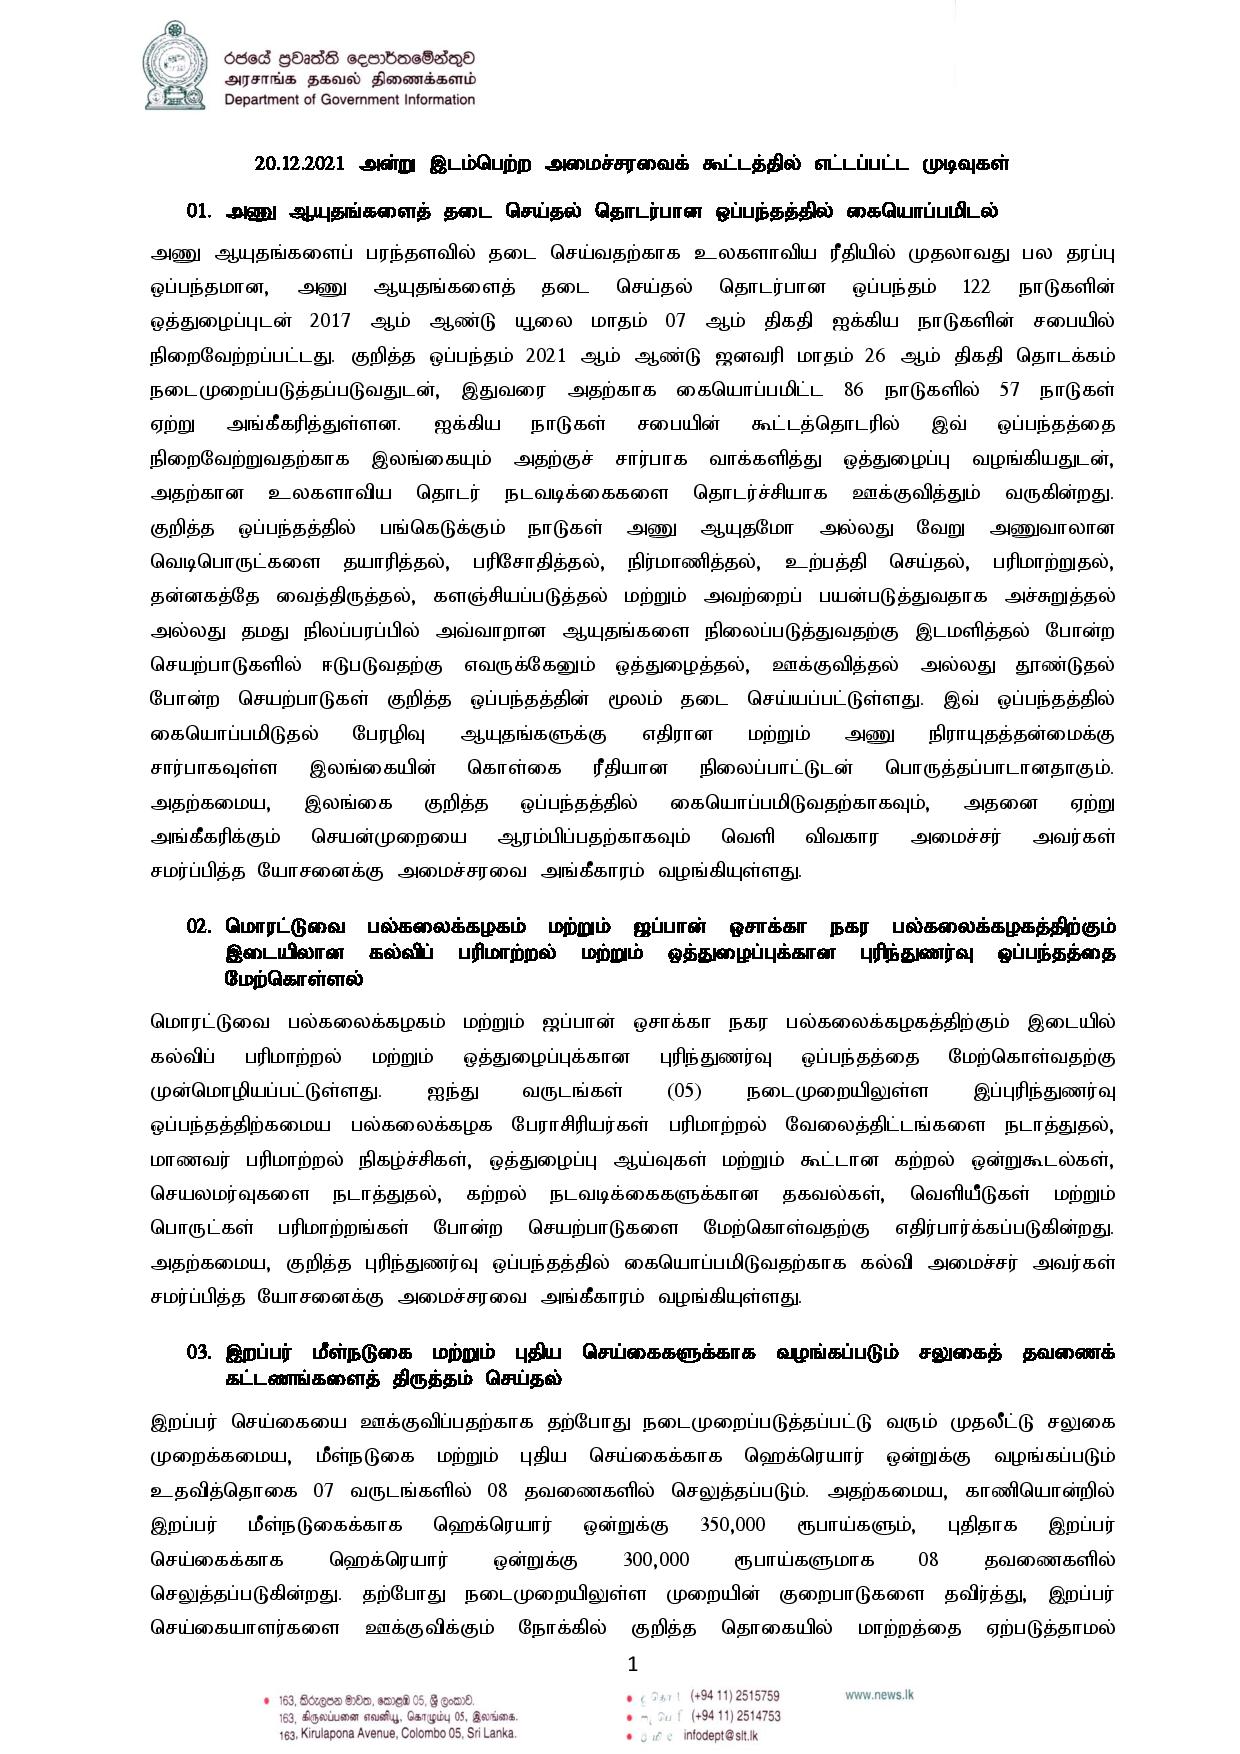 Cabinet Decisions on 20.12.2021 Tamil page 001